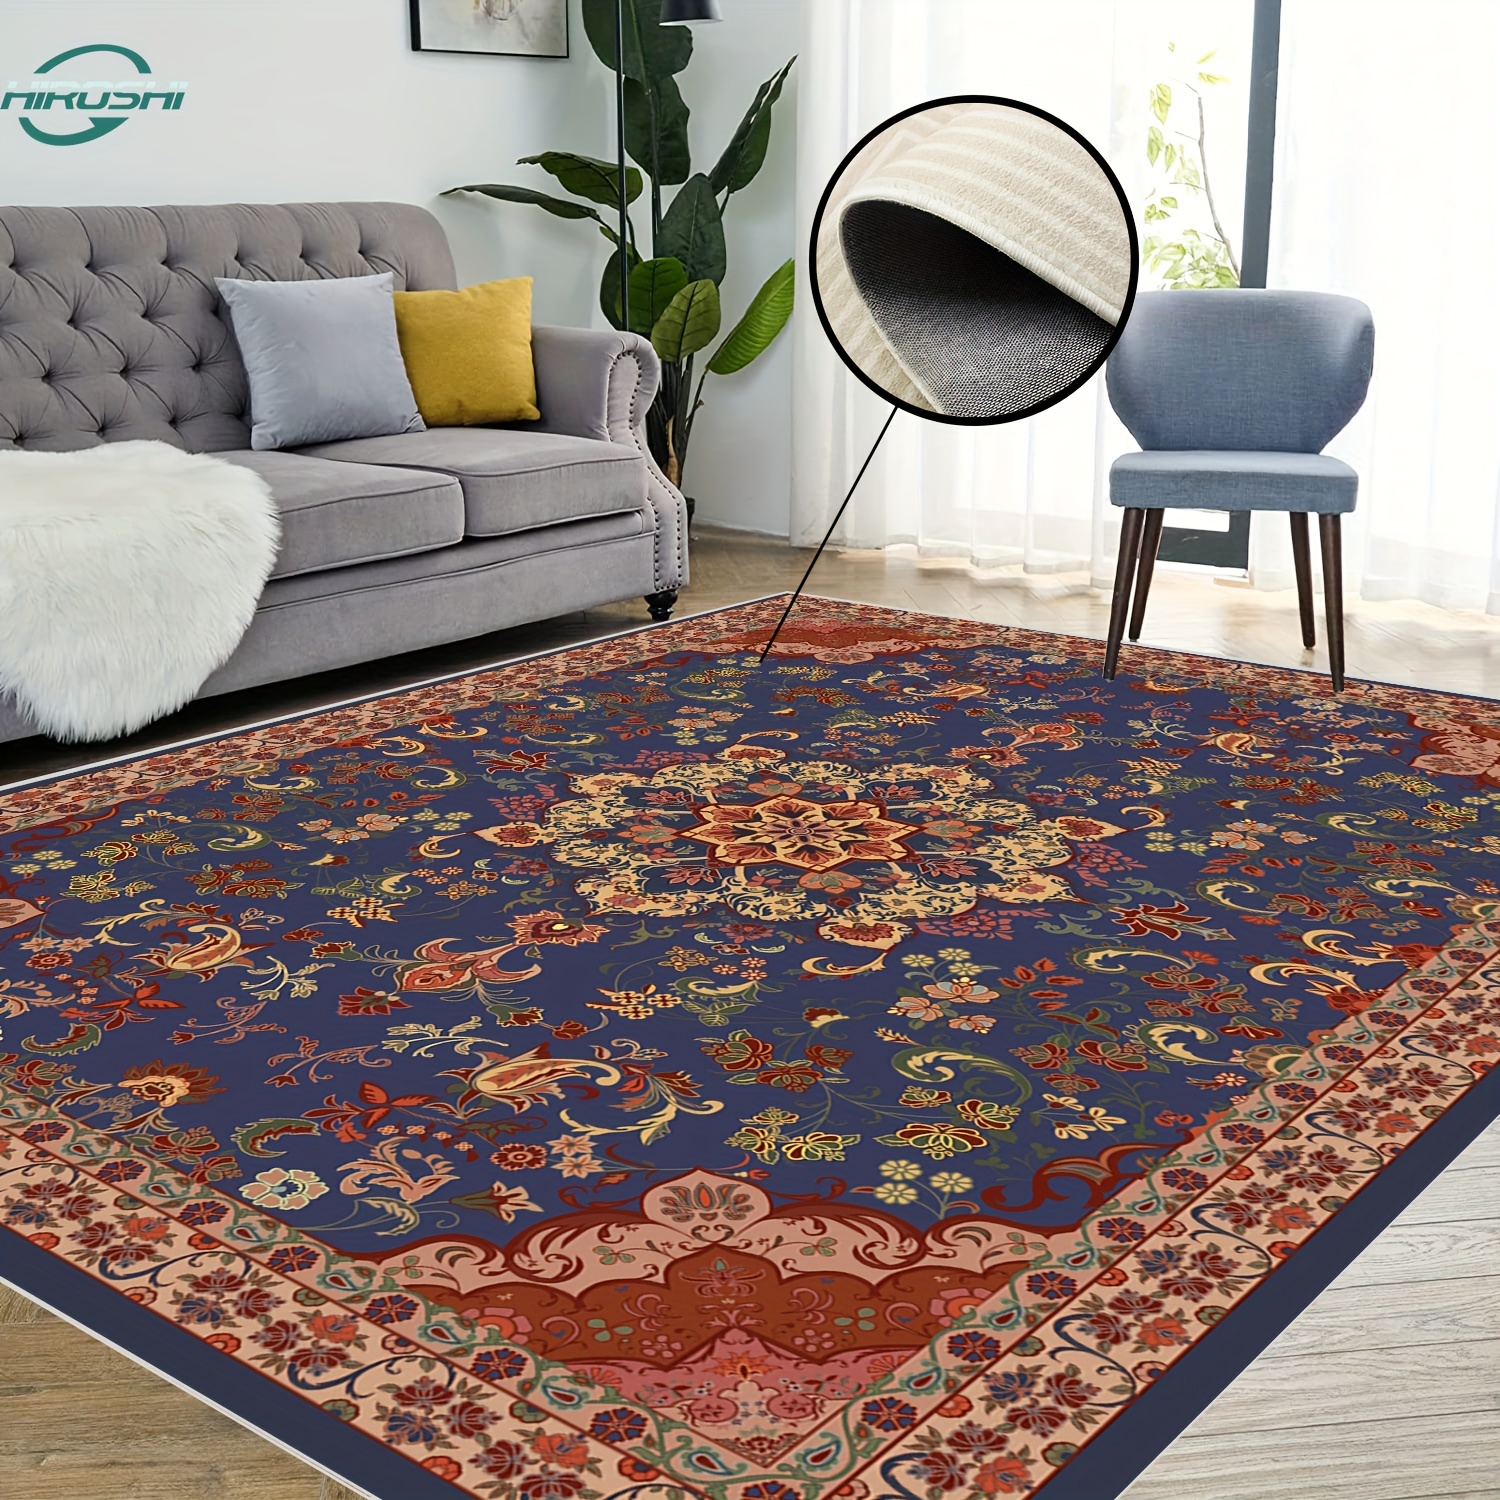 Area Rug for Living Room - 9x12 Washable Boho Vintage Oriental Distressed  Farmhouse Large Thin Indoor Carpet for Bedroom Under Dining Table Home